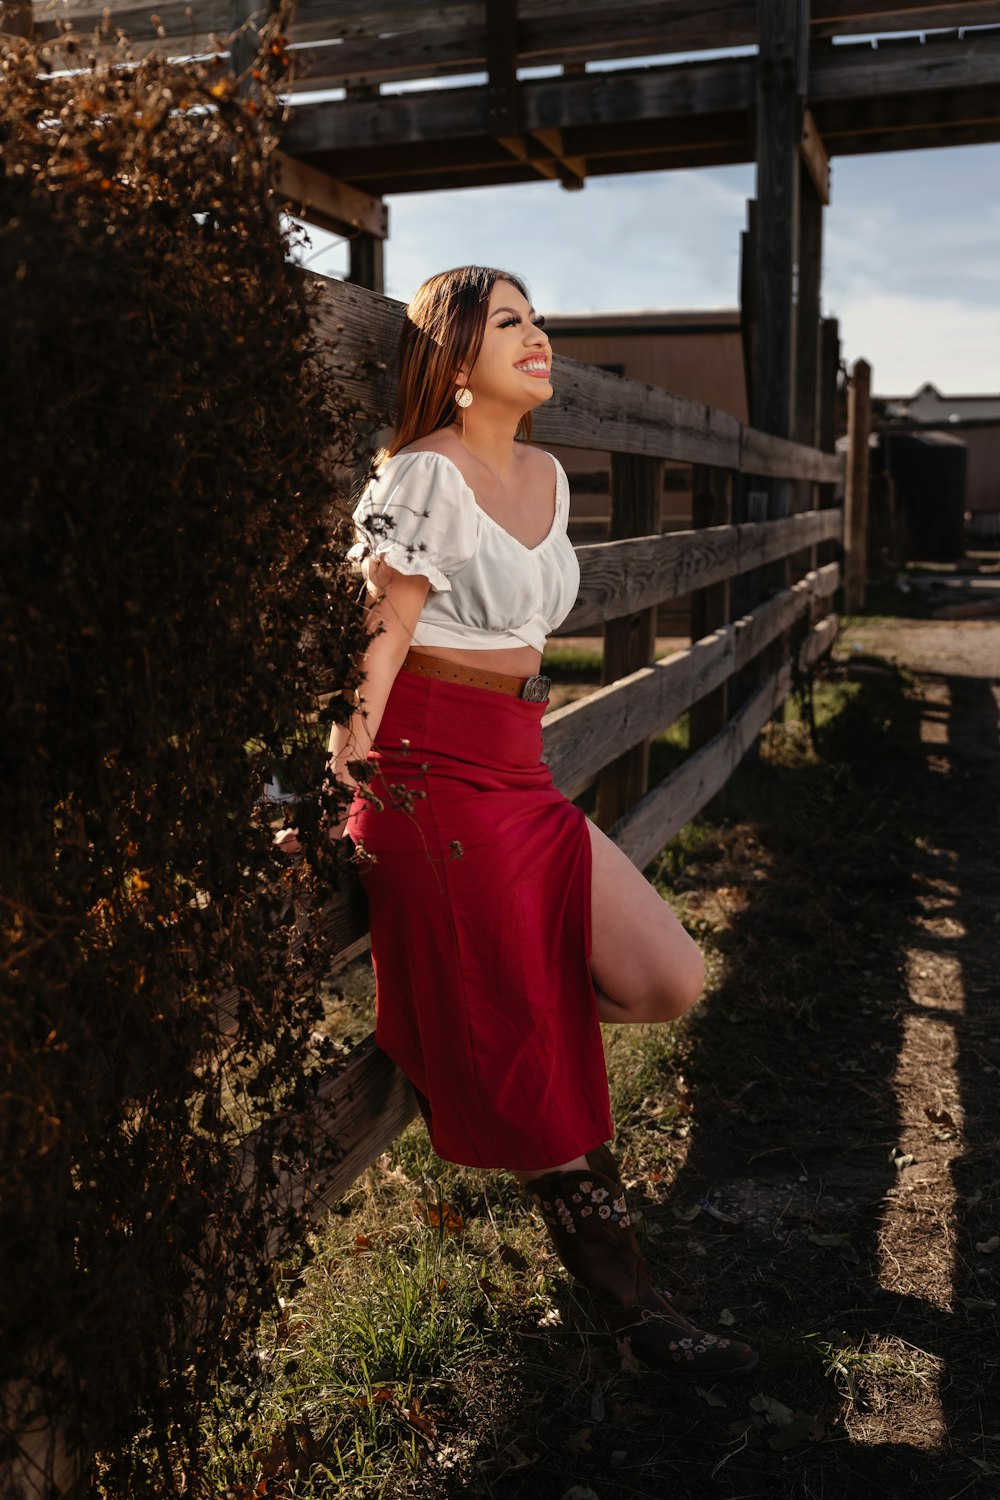 a woman leaning against a fence wearing a white top and red skirt